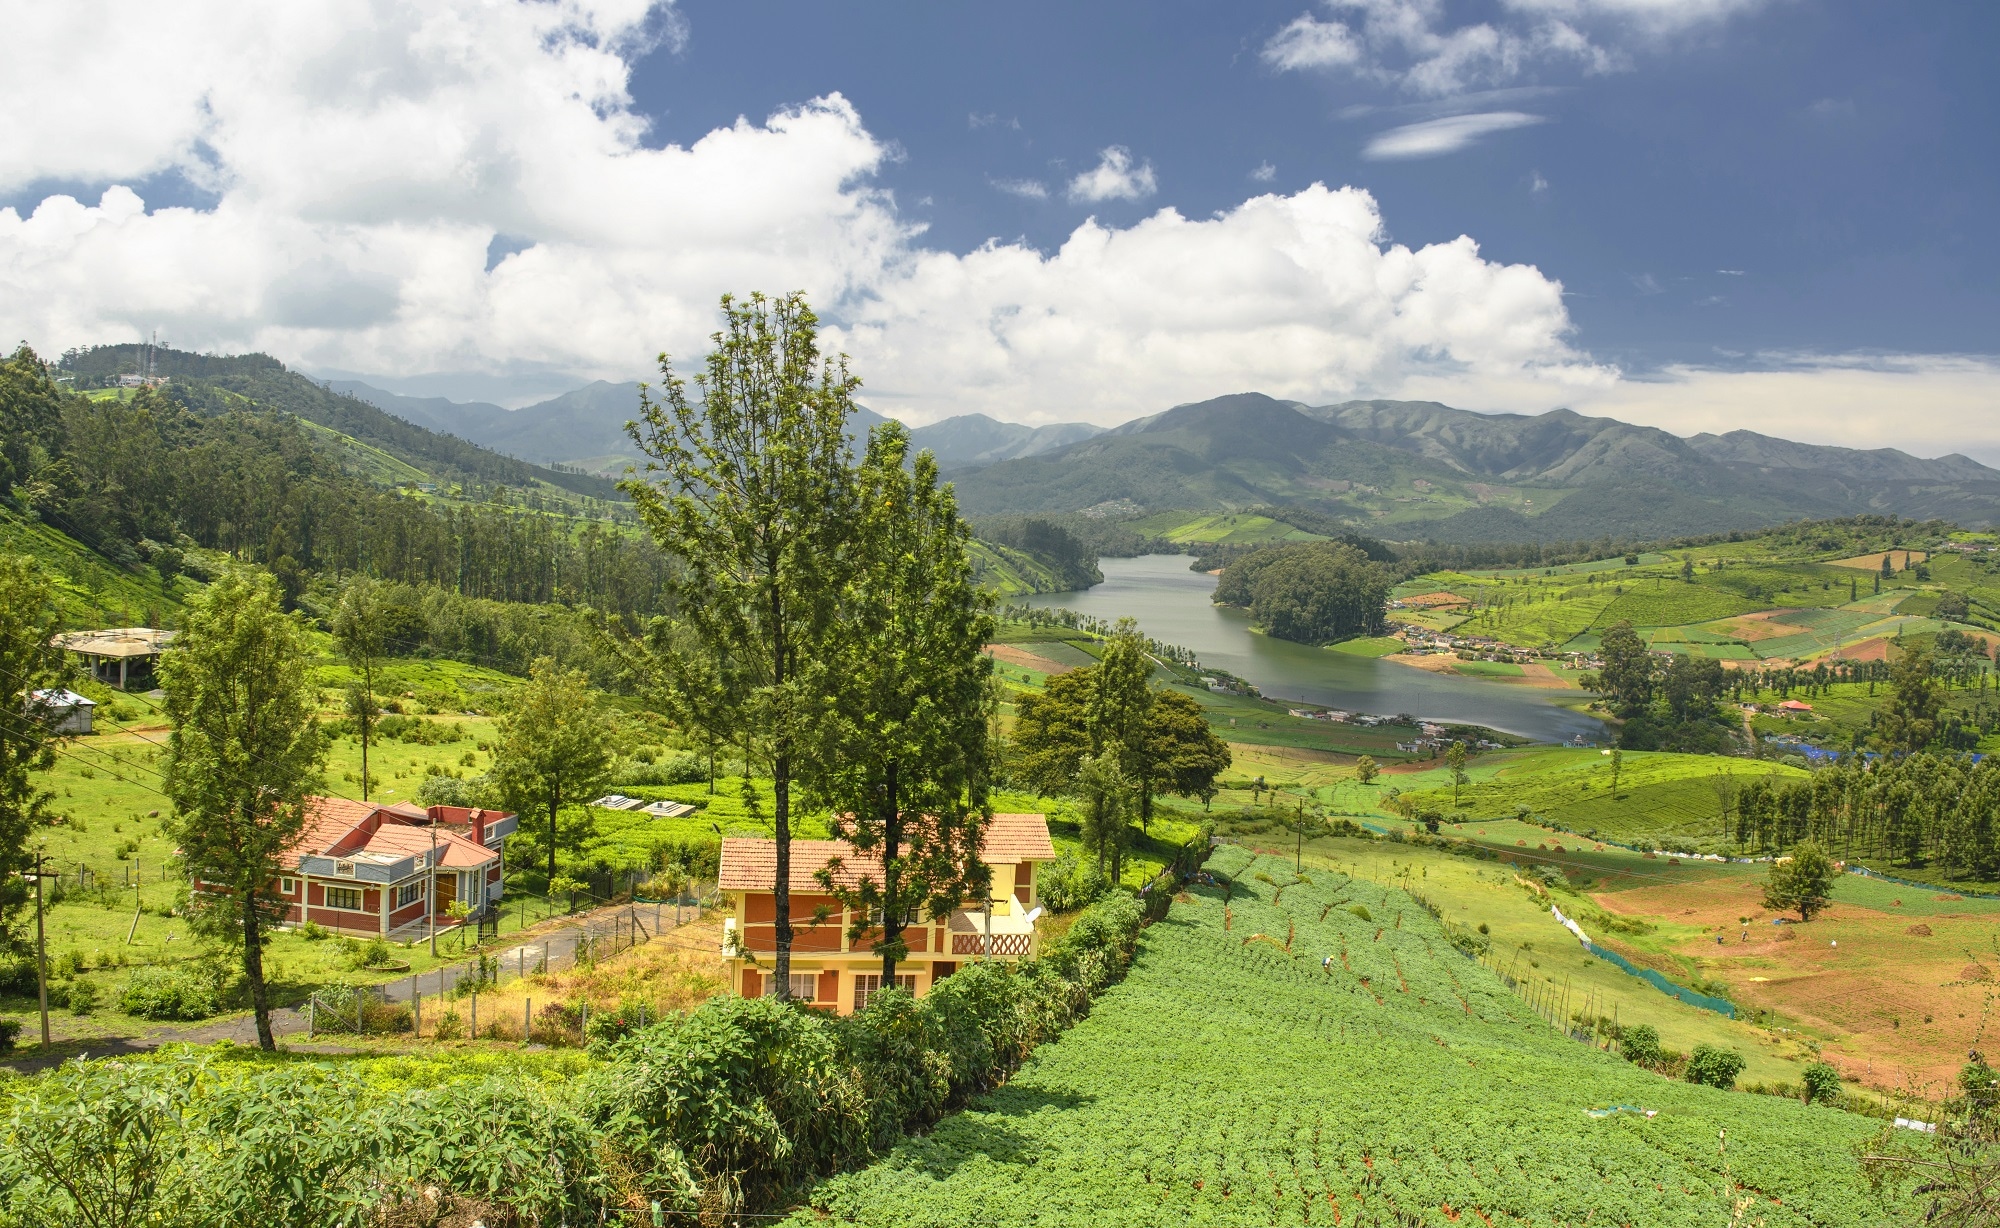 How about a hill station in the Nilgiris, with Coonoor?